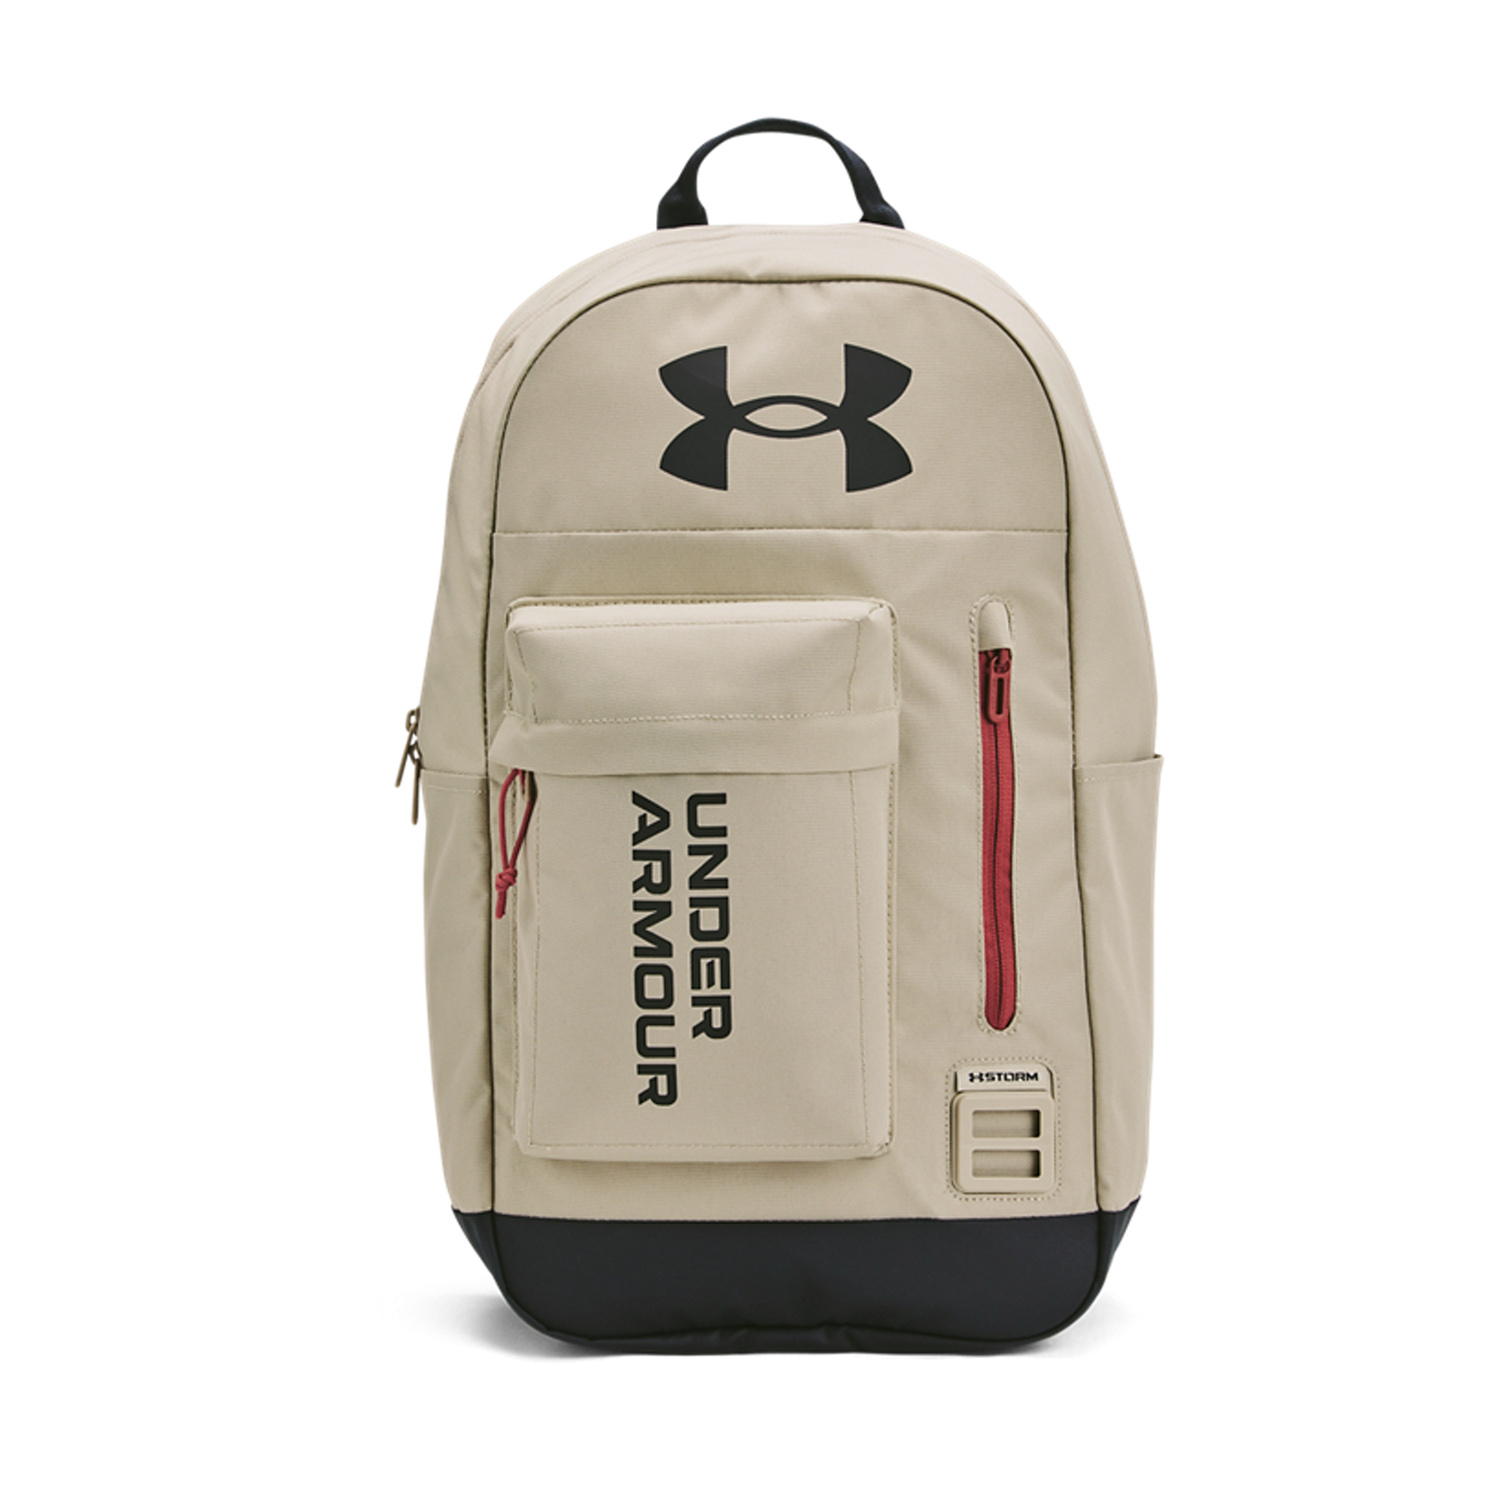 Under Armour Halftime Backpack - Khaki Base/Sedona Red/Anthracite